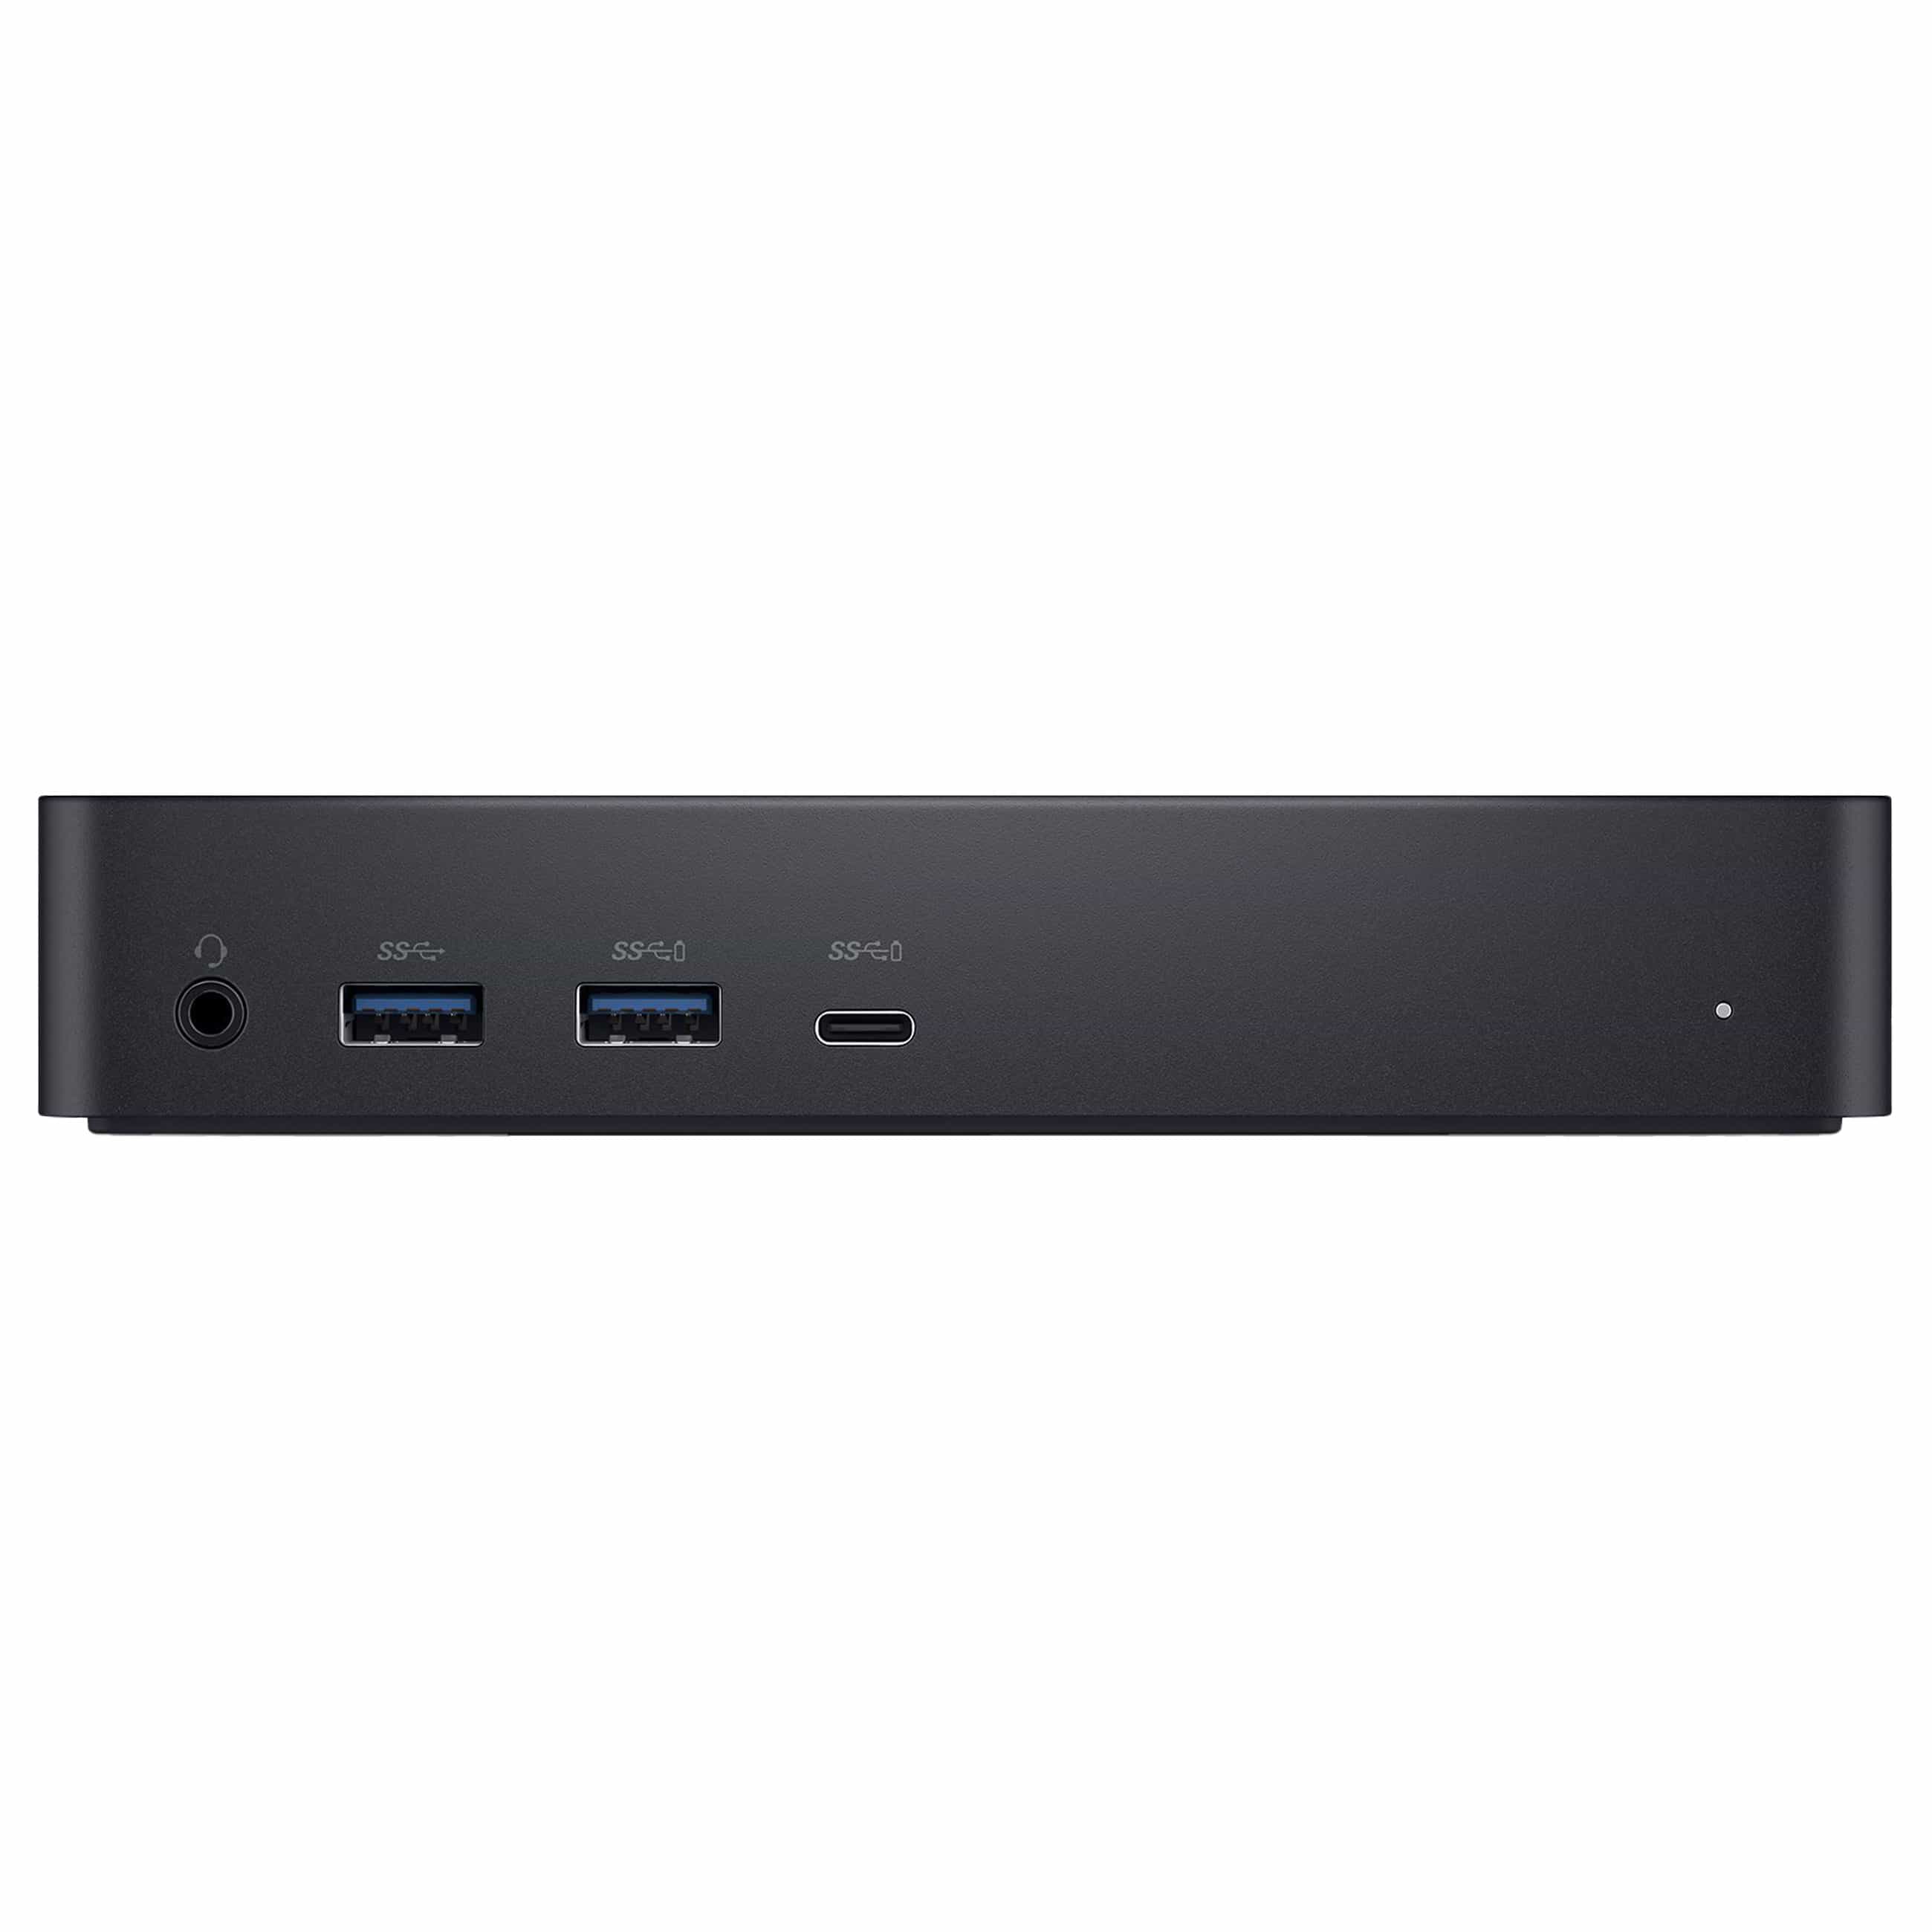 Dell D6000 Universal Dock (452-BCYT)